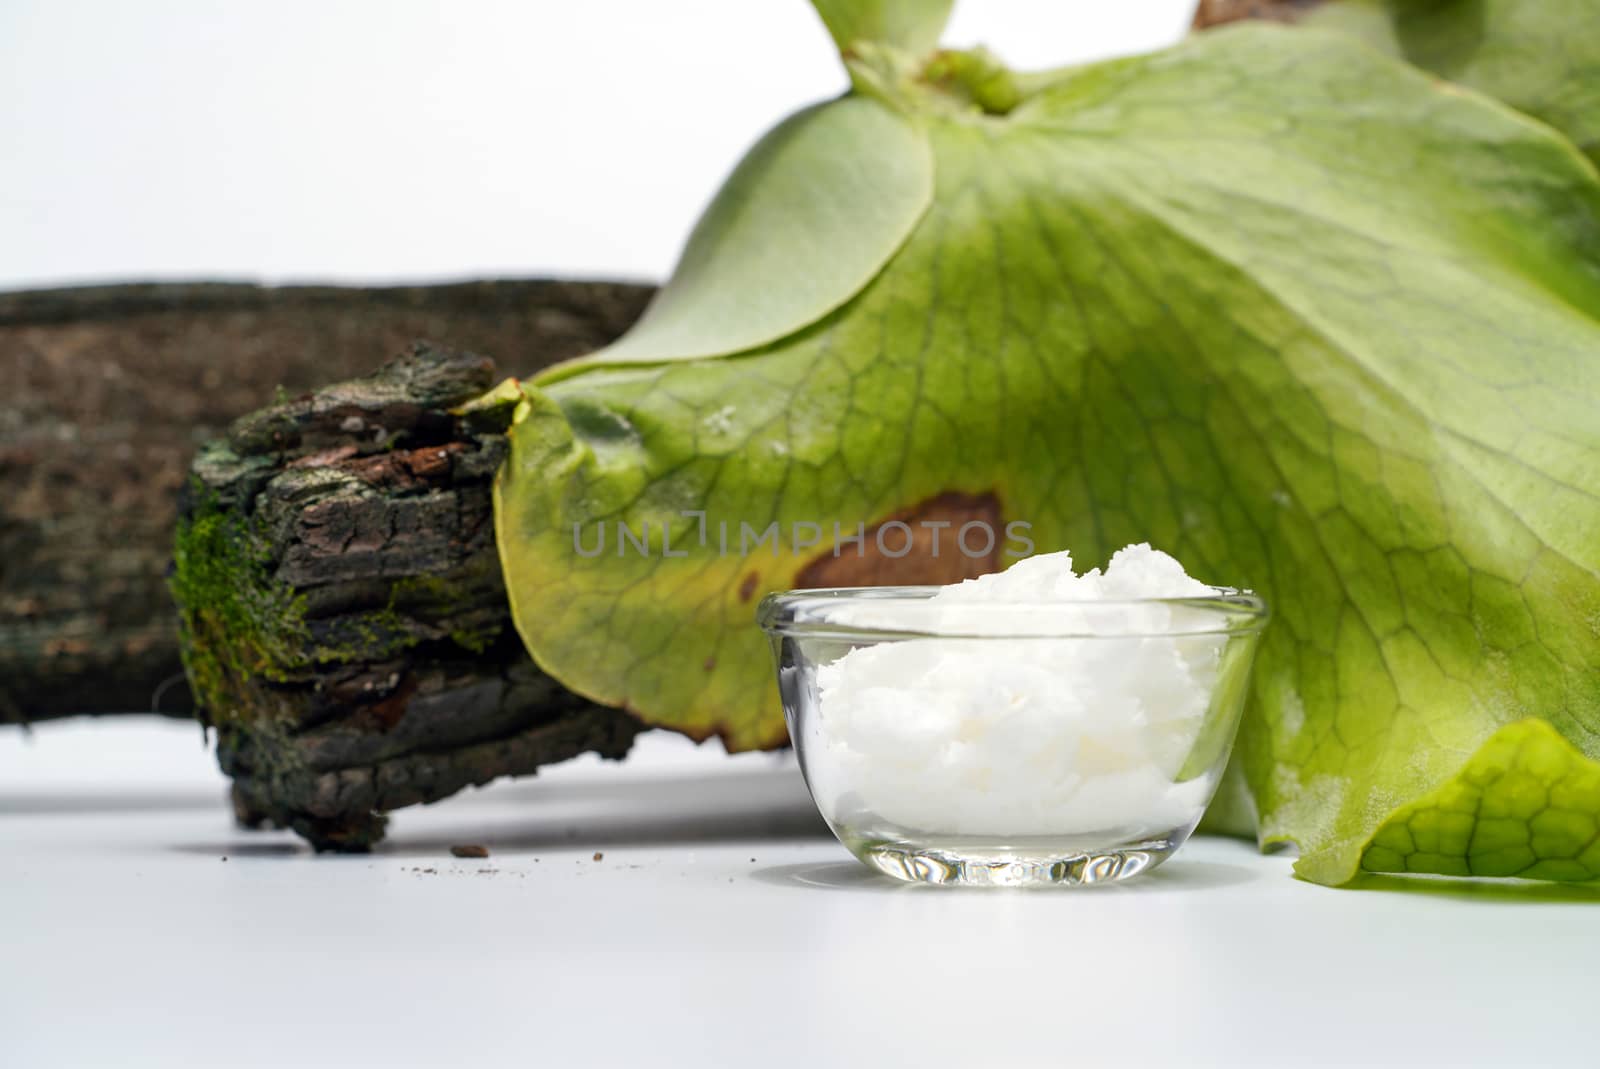 Cetyl esters wax, Chemical used in OTC products and topical pharmaceuticals.